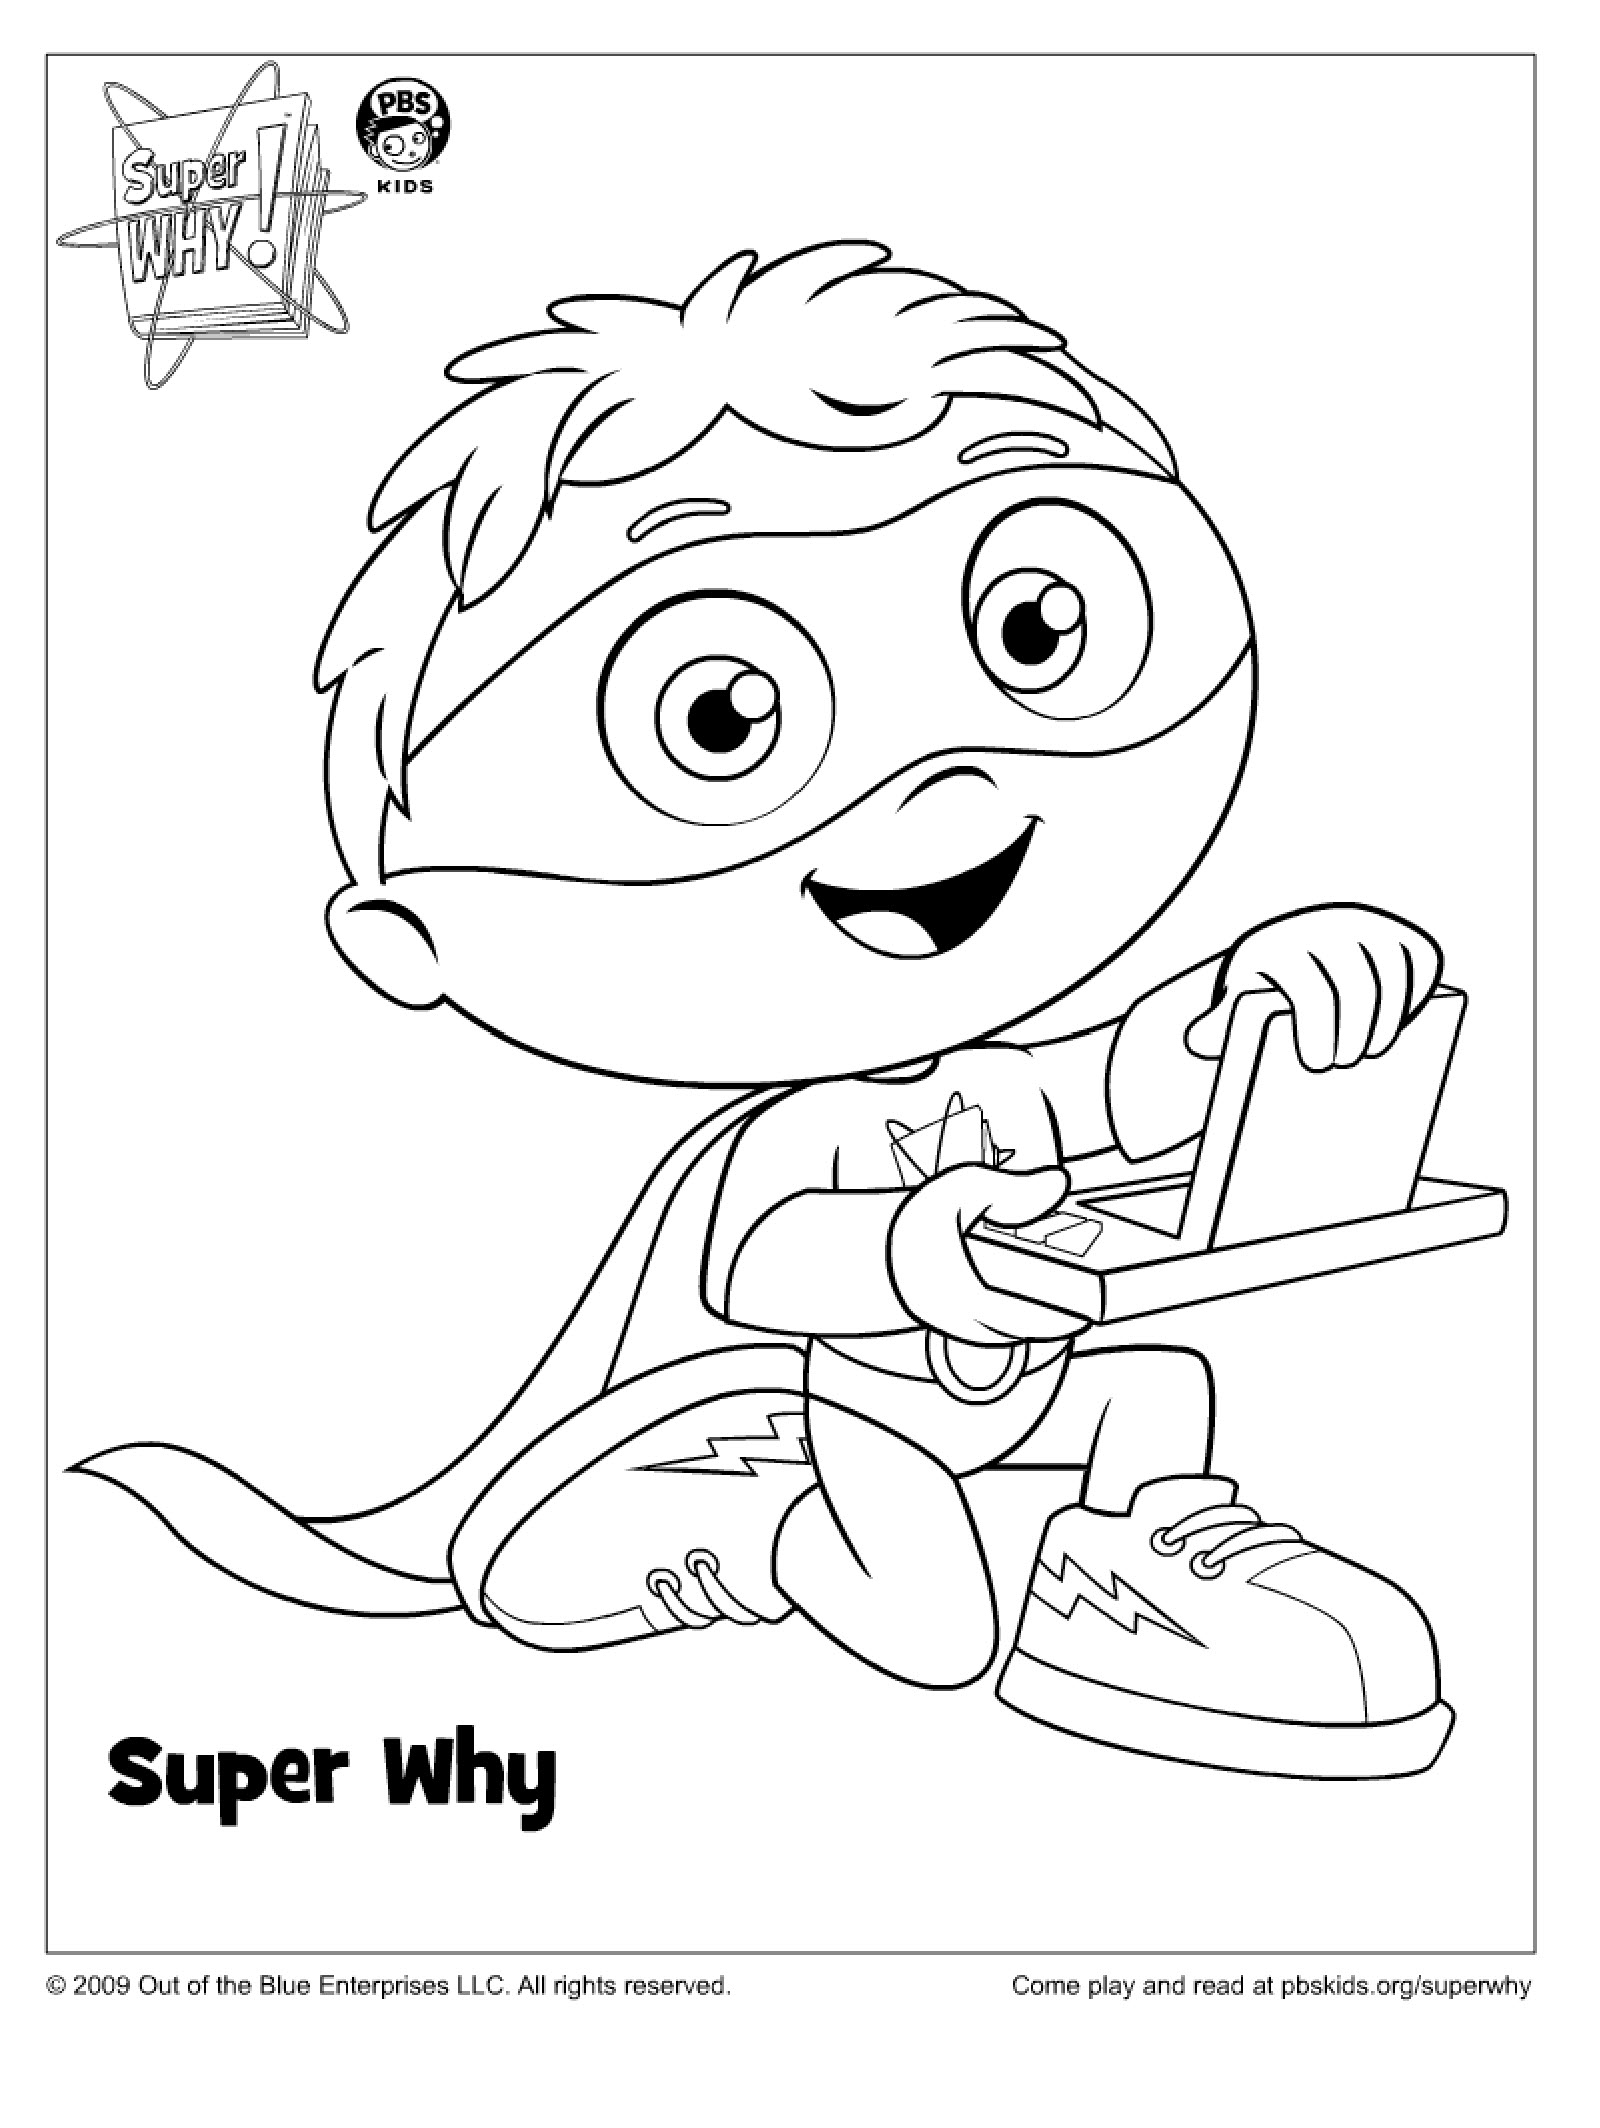 Print and color Super Why from Super Why.